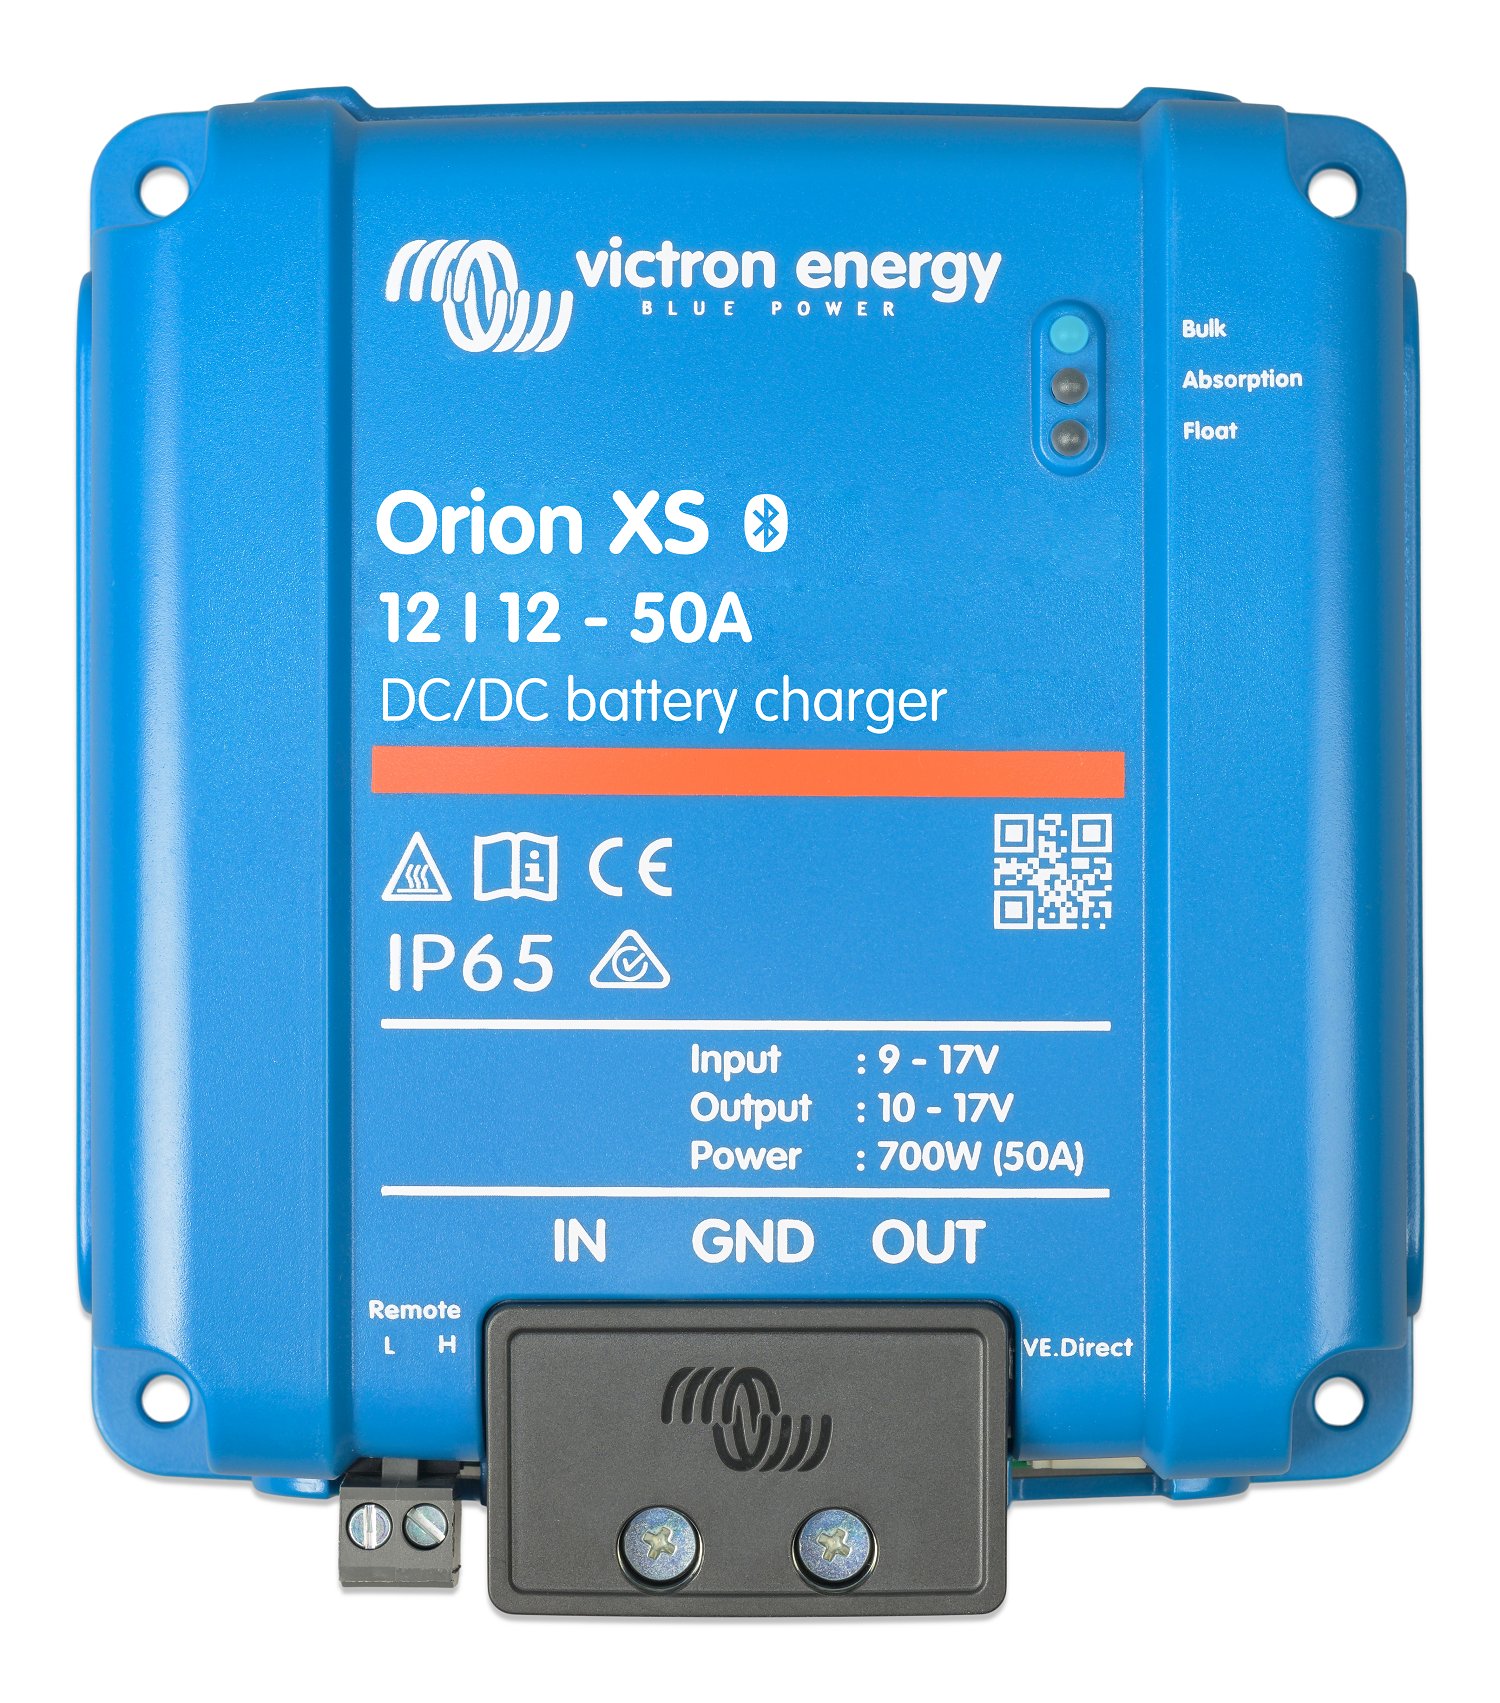 When will the Victron Orion XS support 24V systems?